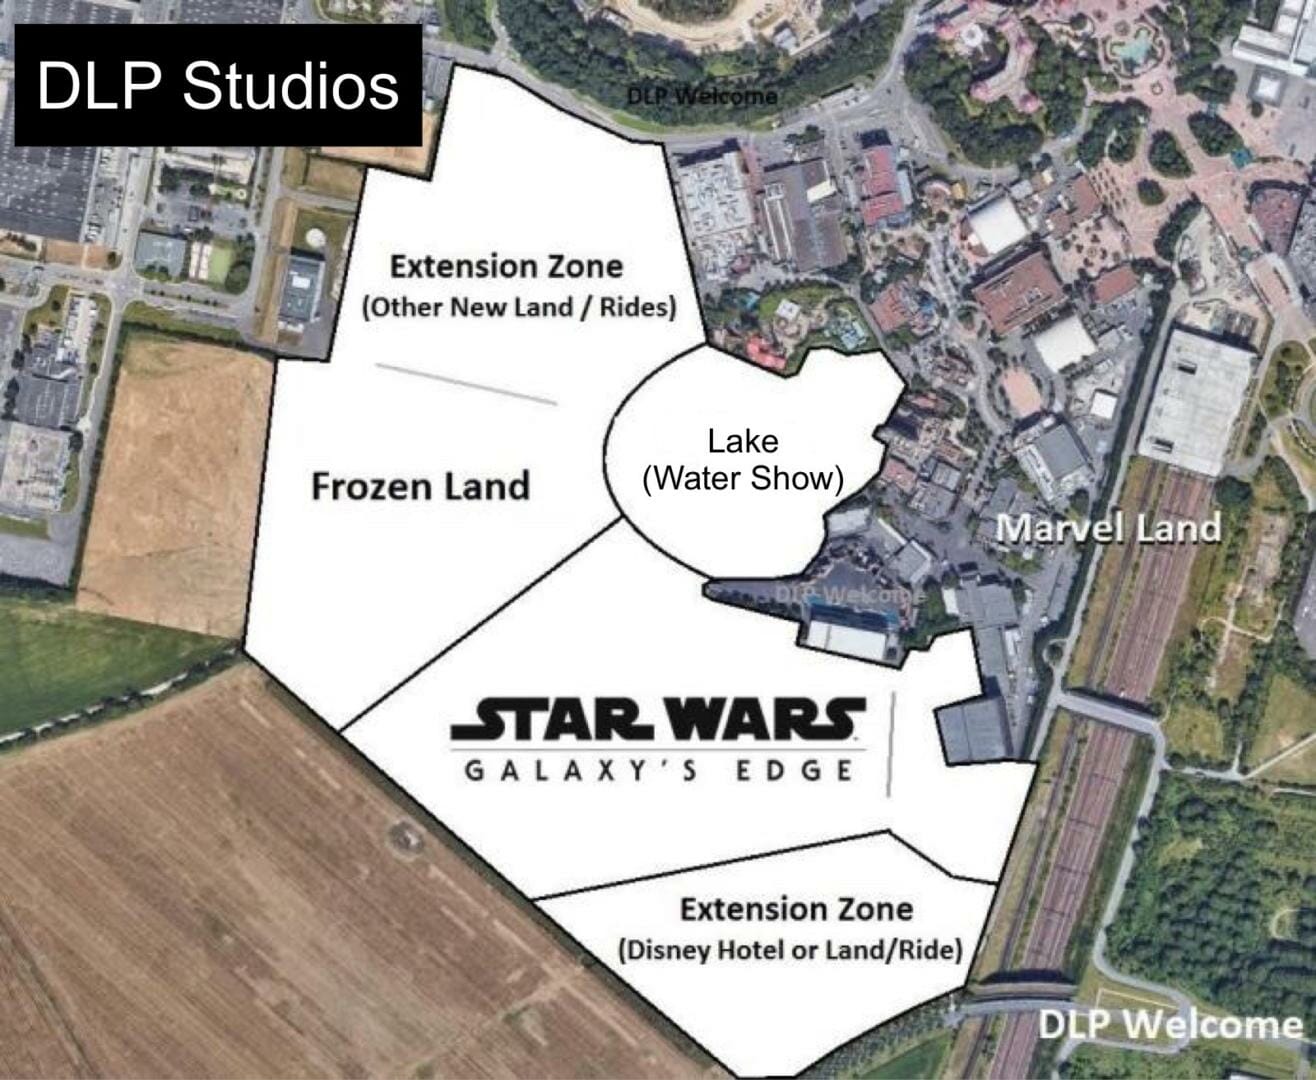 Disneyland Paris Is Expanding With A 'Frozen'-Themed Park In 2023